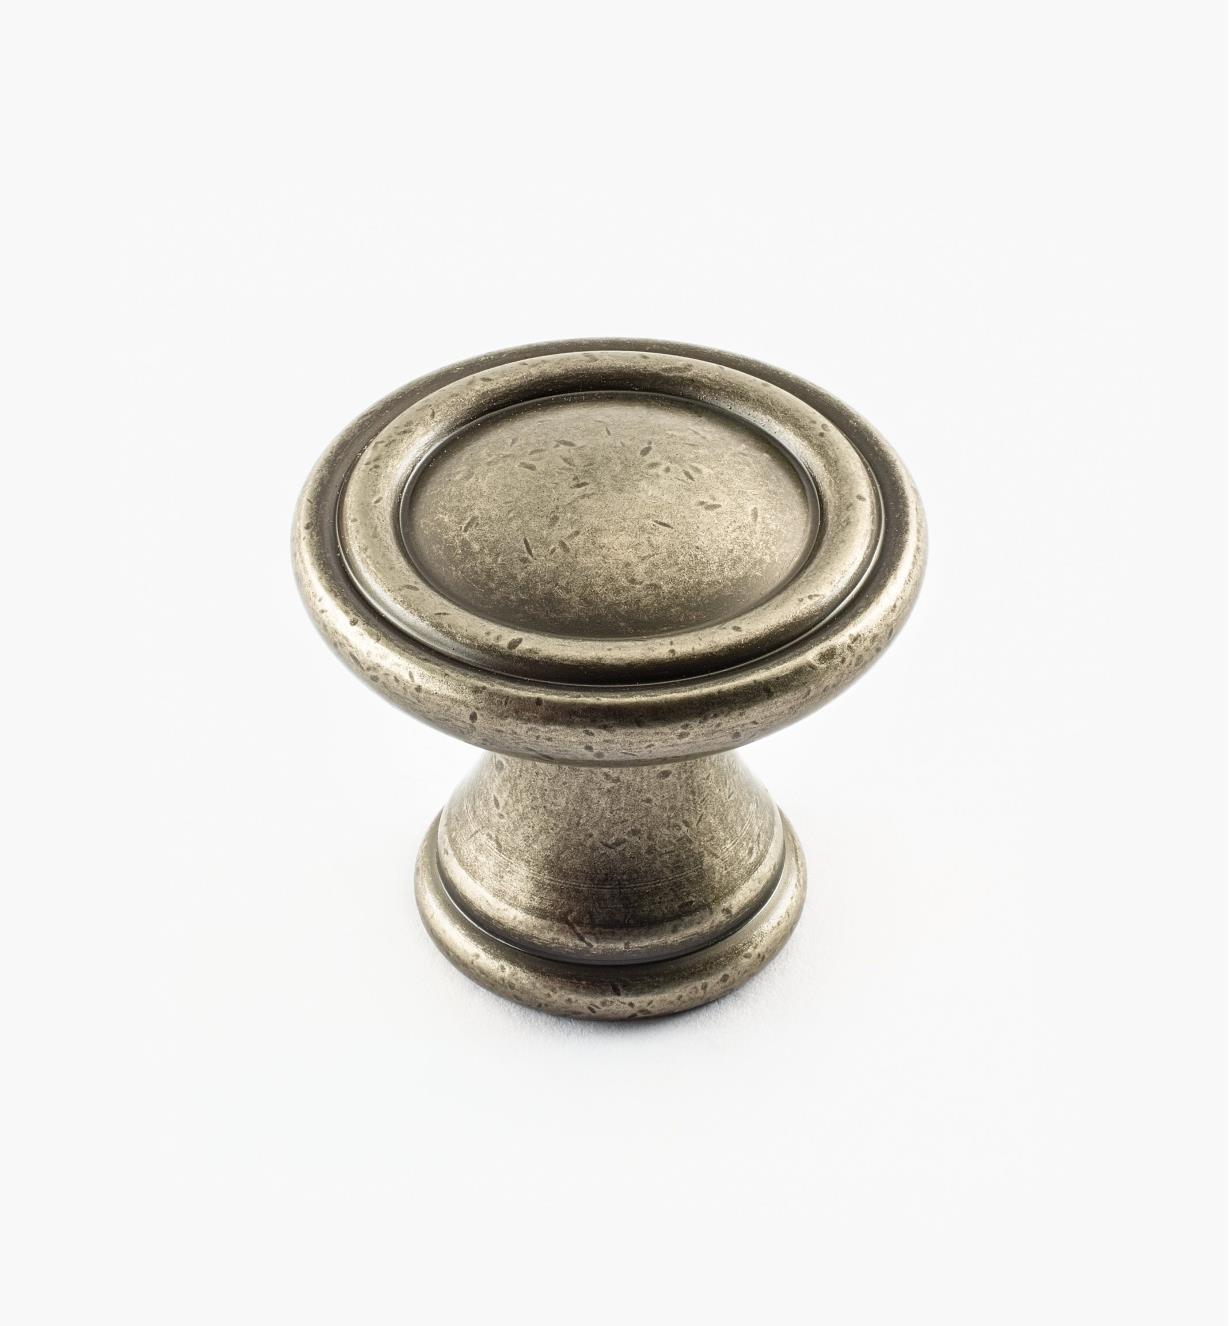 02A1450 - 30mm x 27mm Antique Nickel Double Reed Knob